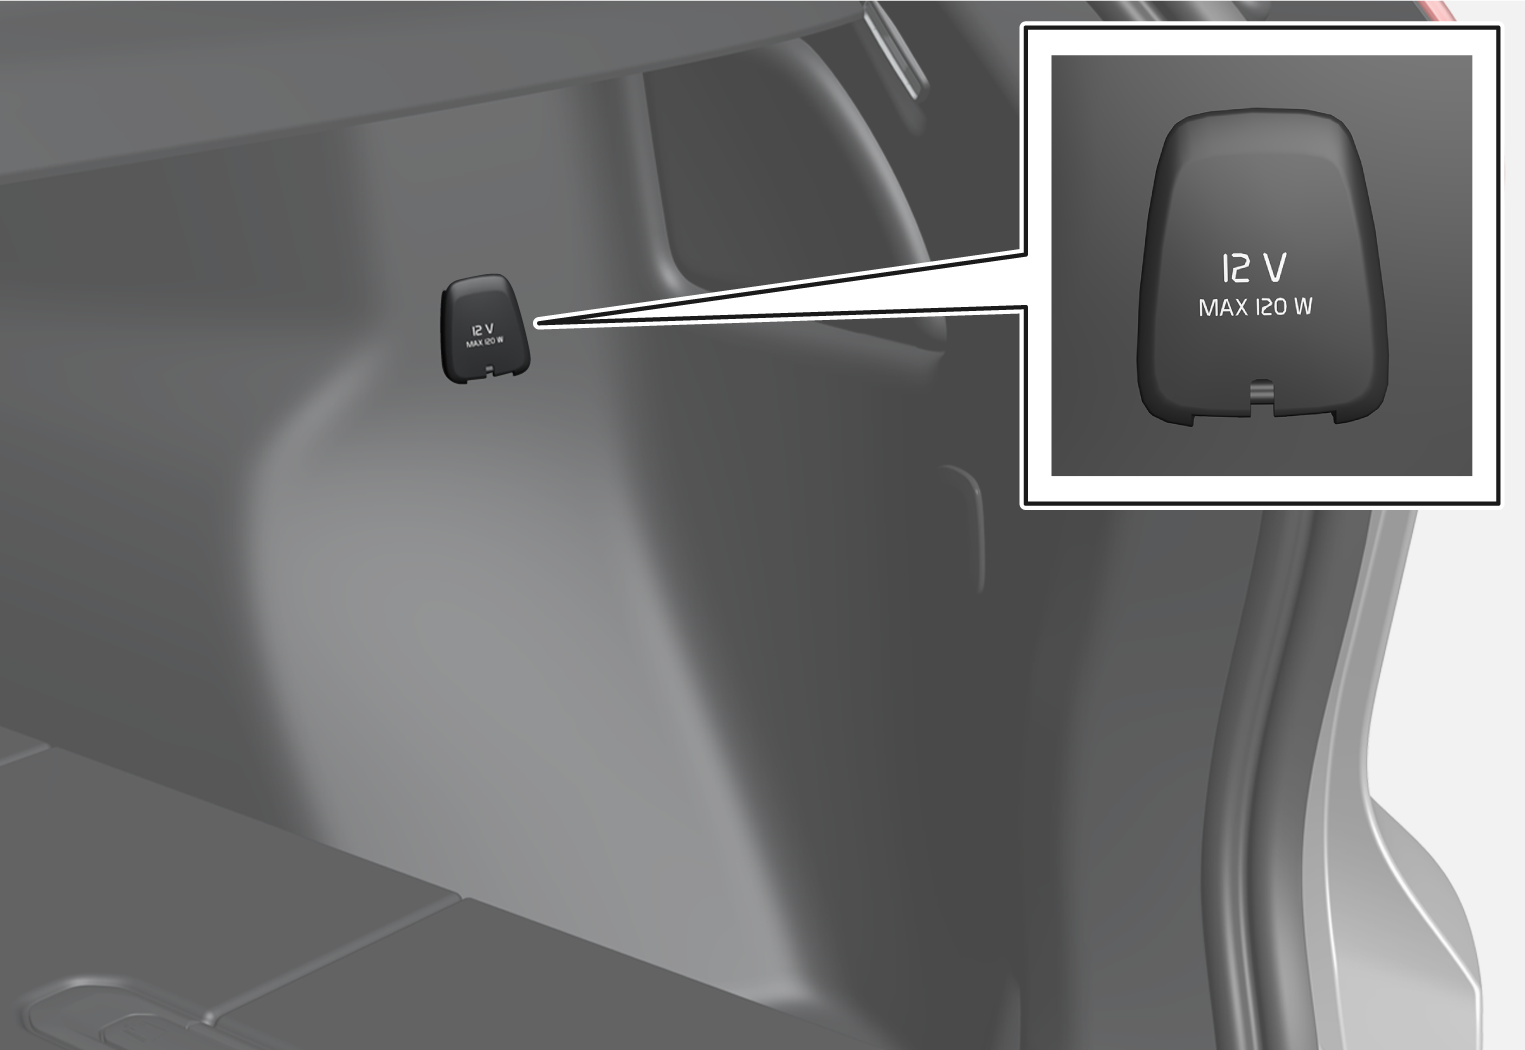 iCup-2246-XC40-12 V outlet storage area